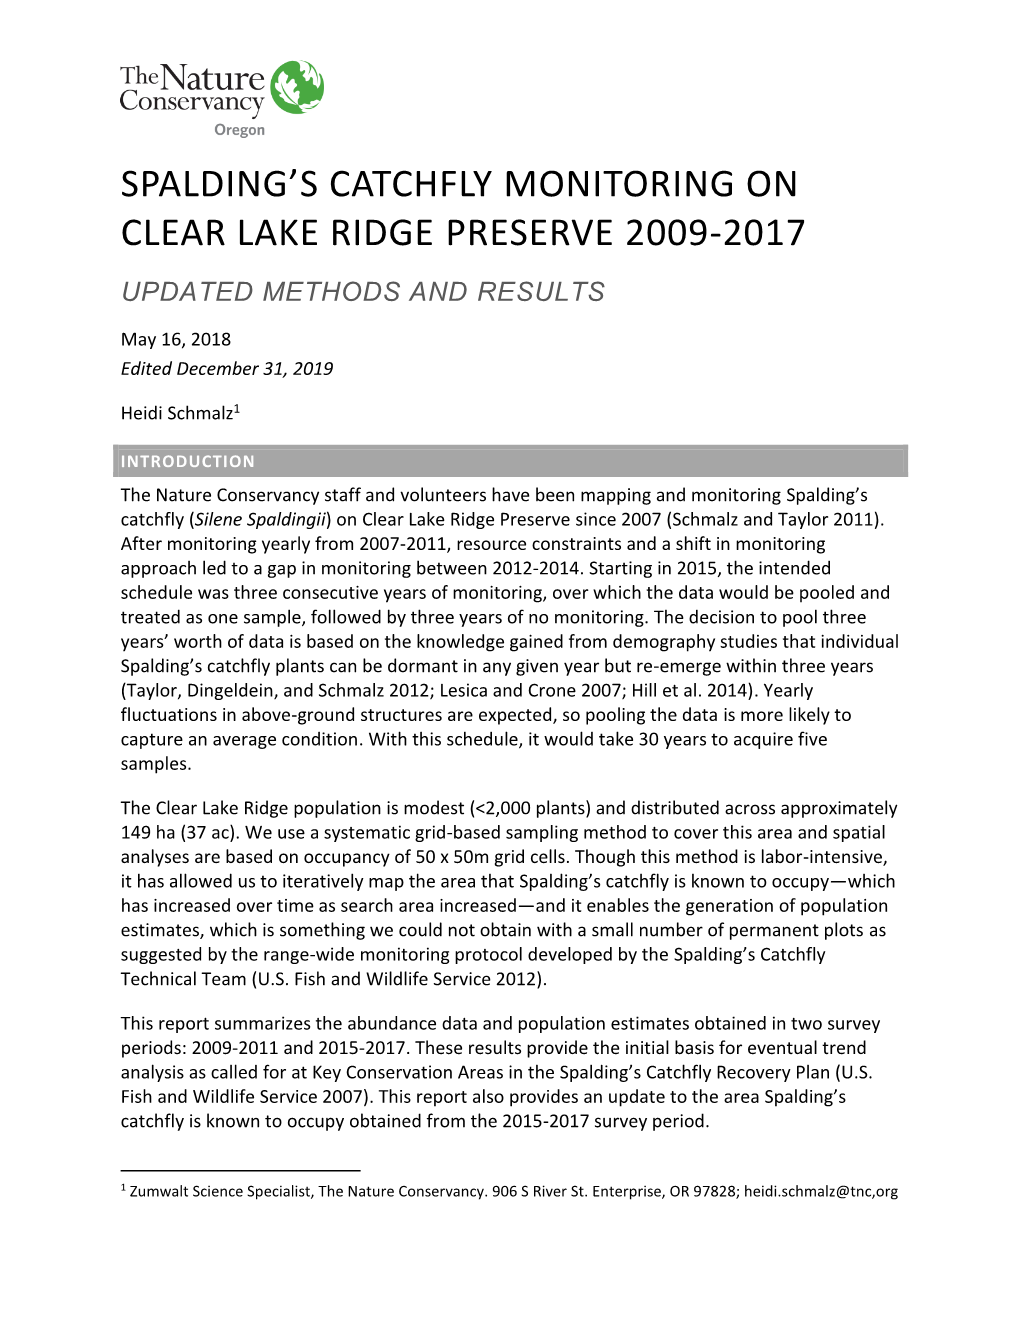 Spalding's Catchfly Monitoring on Clear Lake